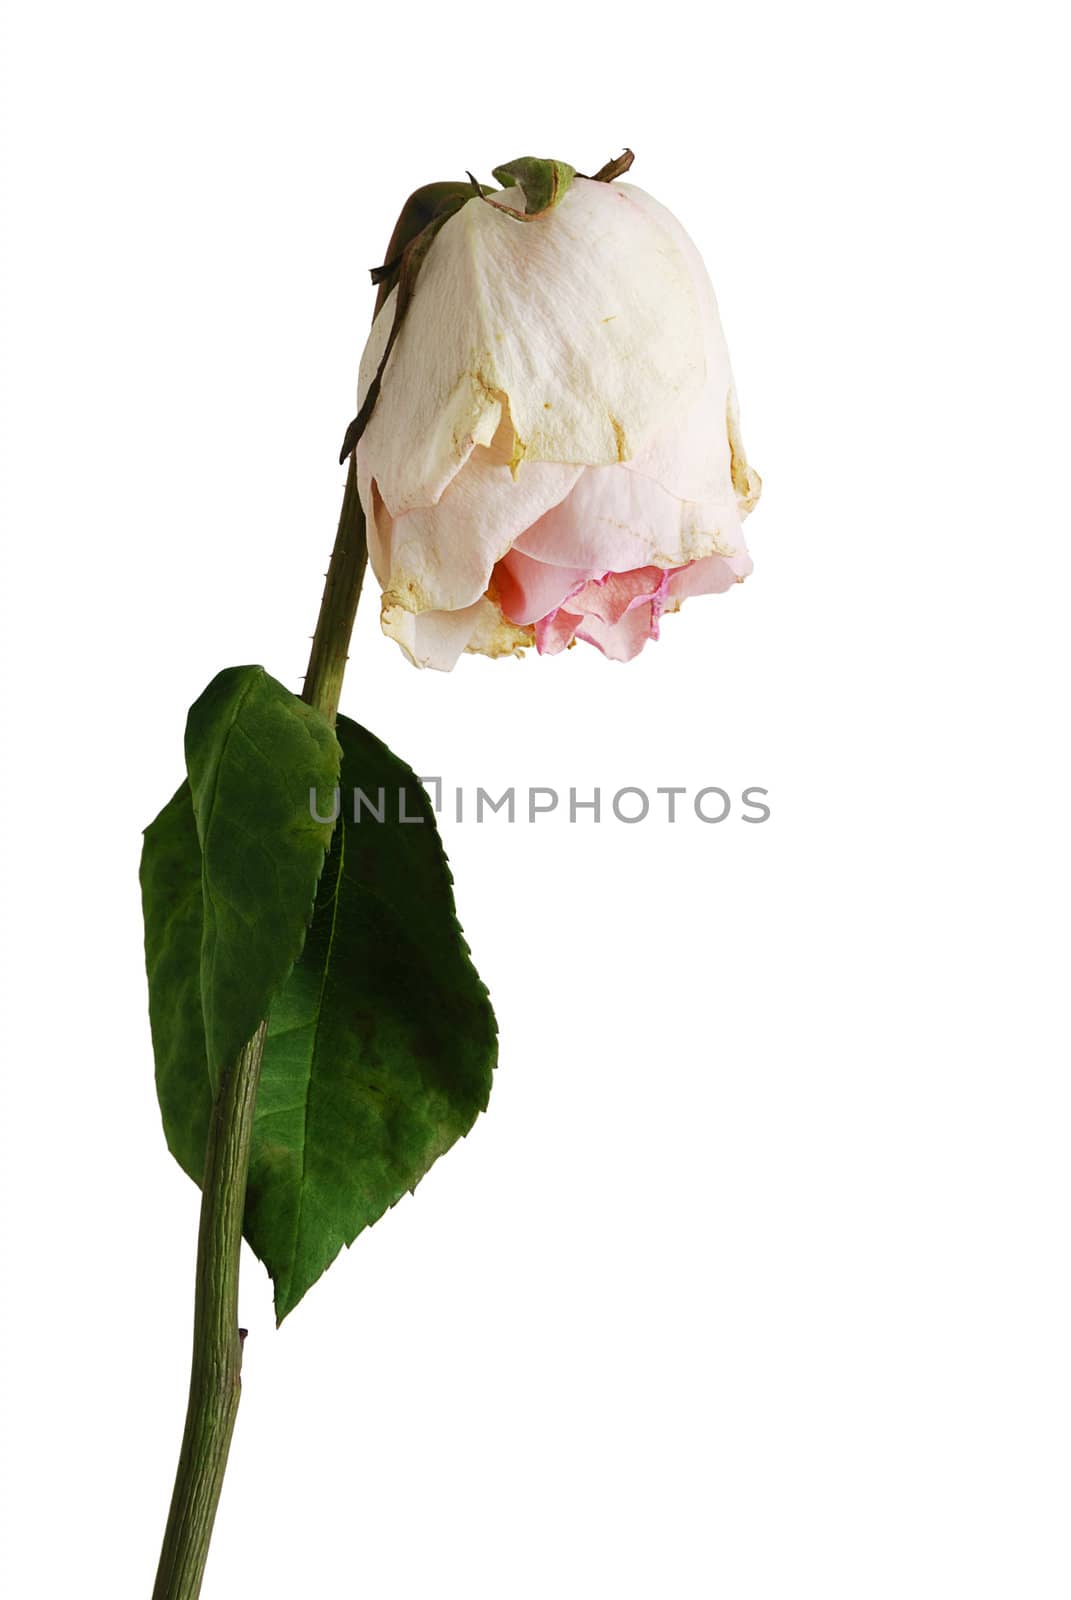 Wilted rose of pale pink color with one leaf by vadidak